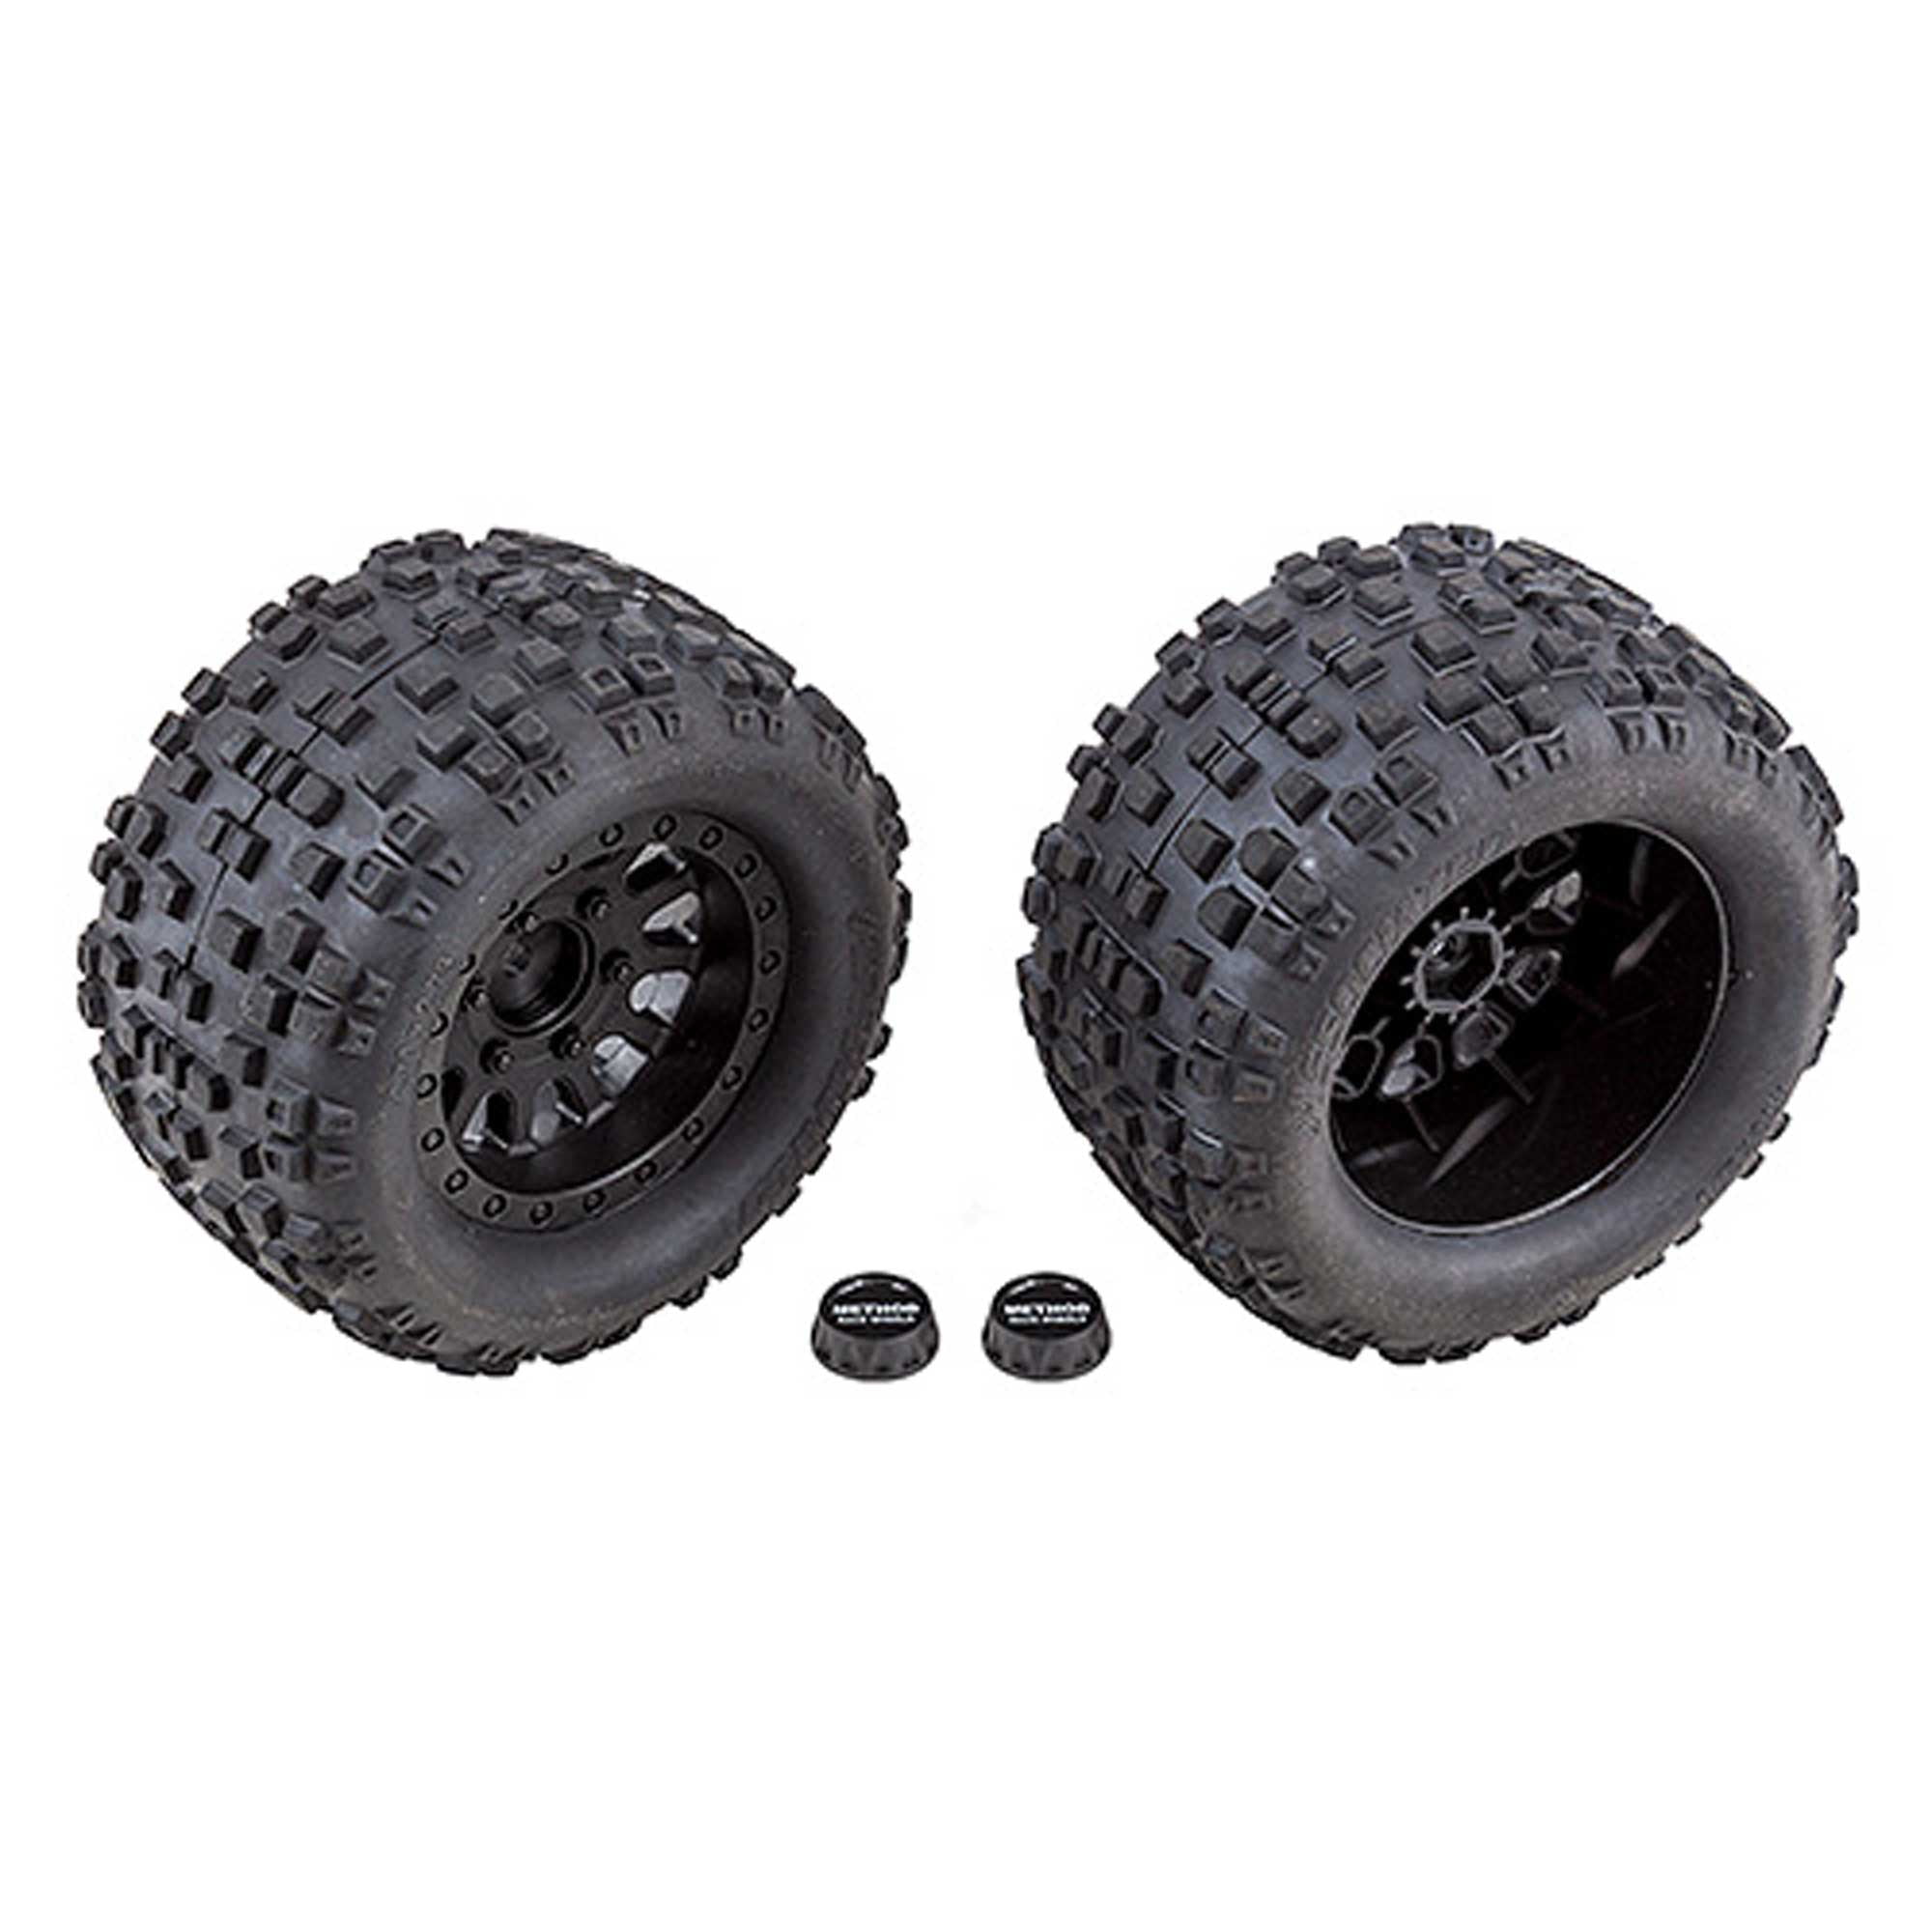 Associated 71044 Multi-terrain Tires and Method Wheels mounted